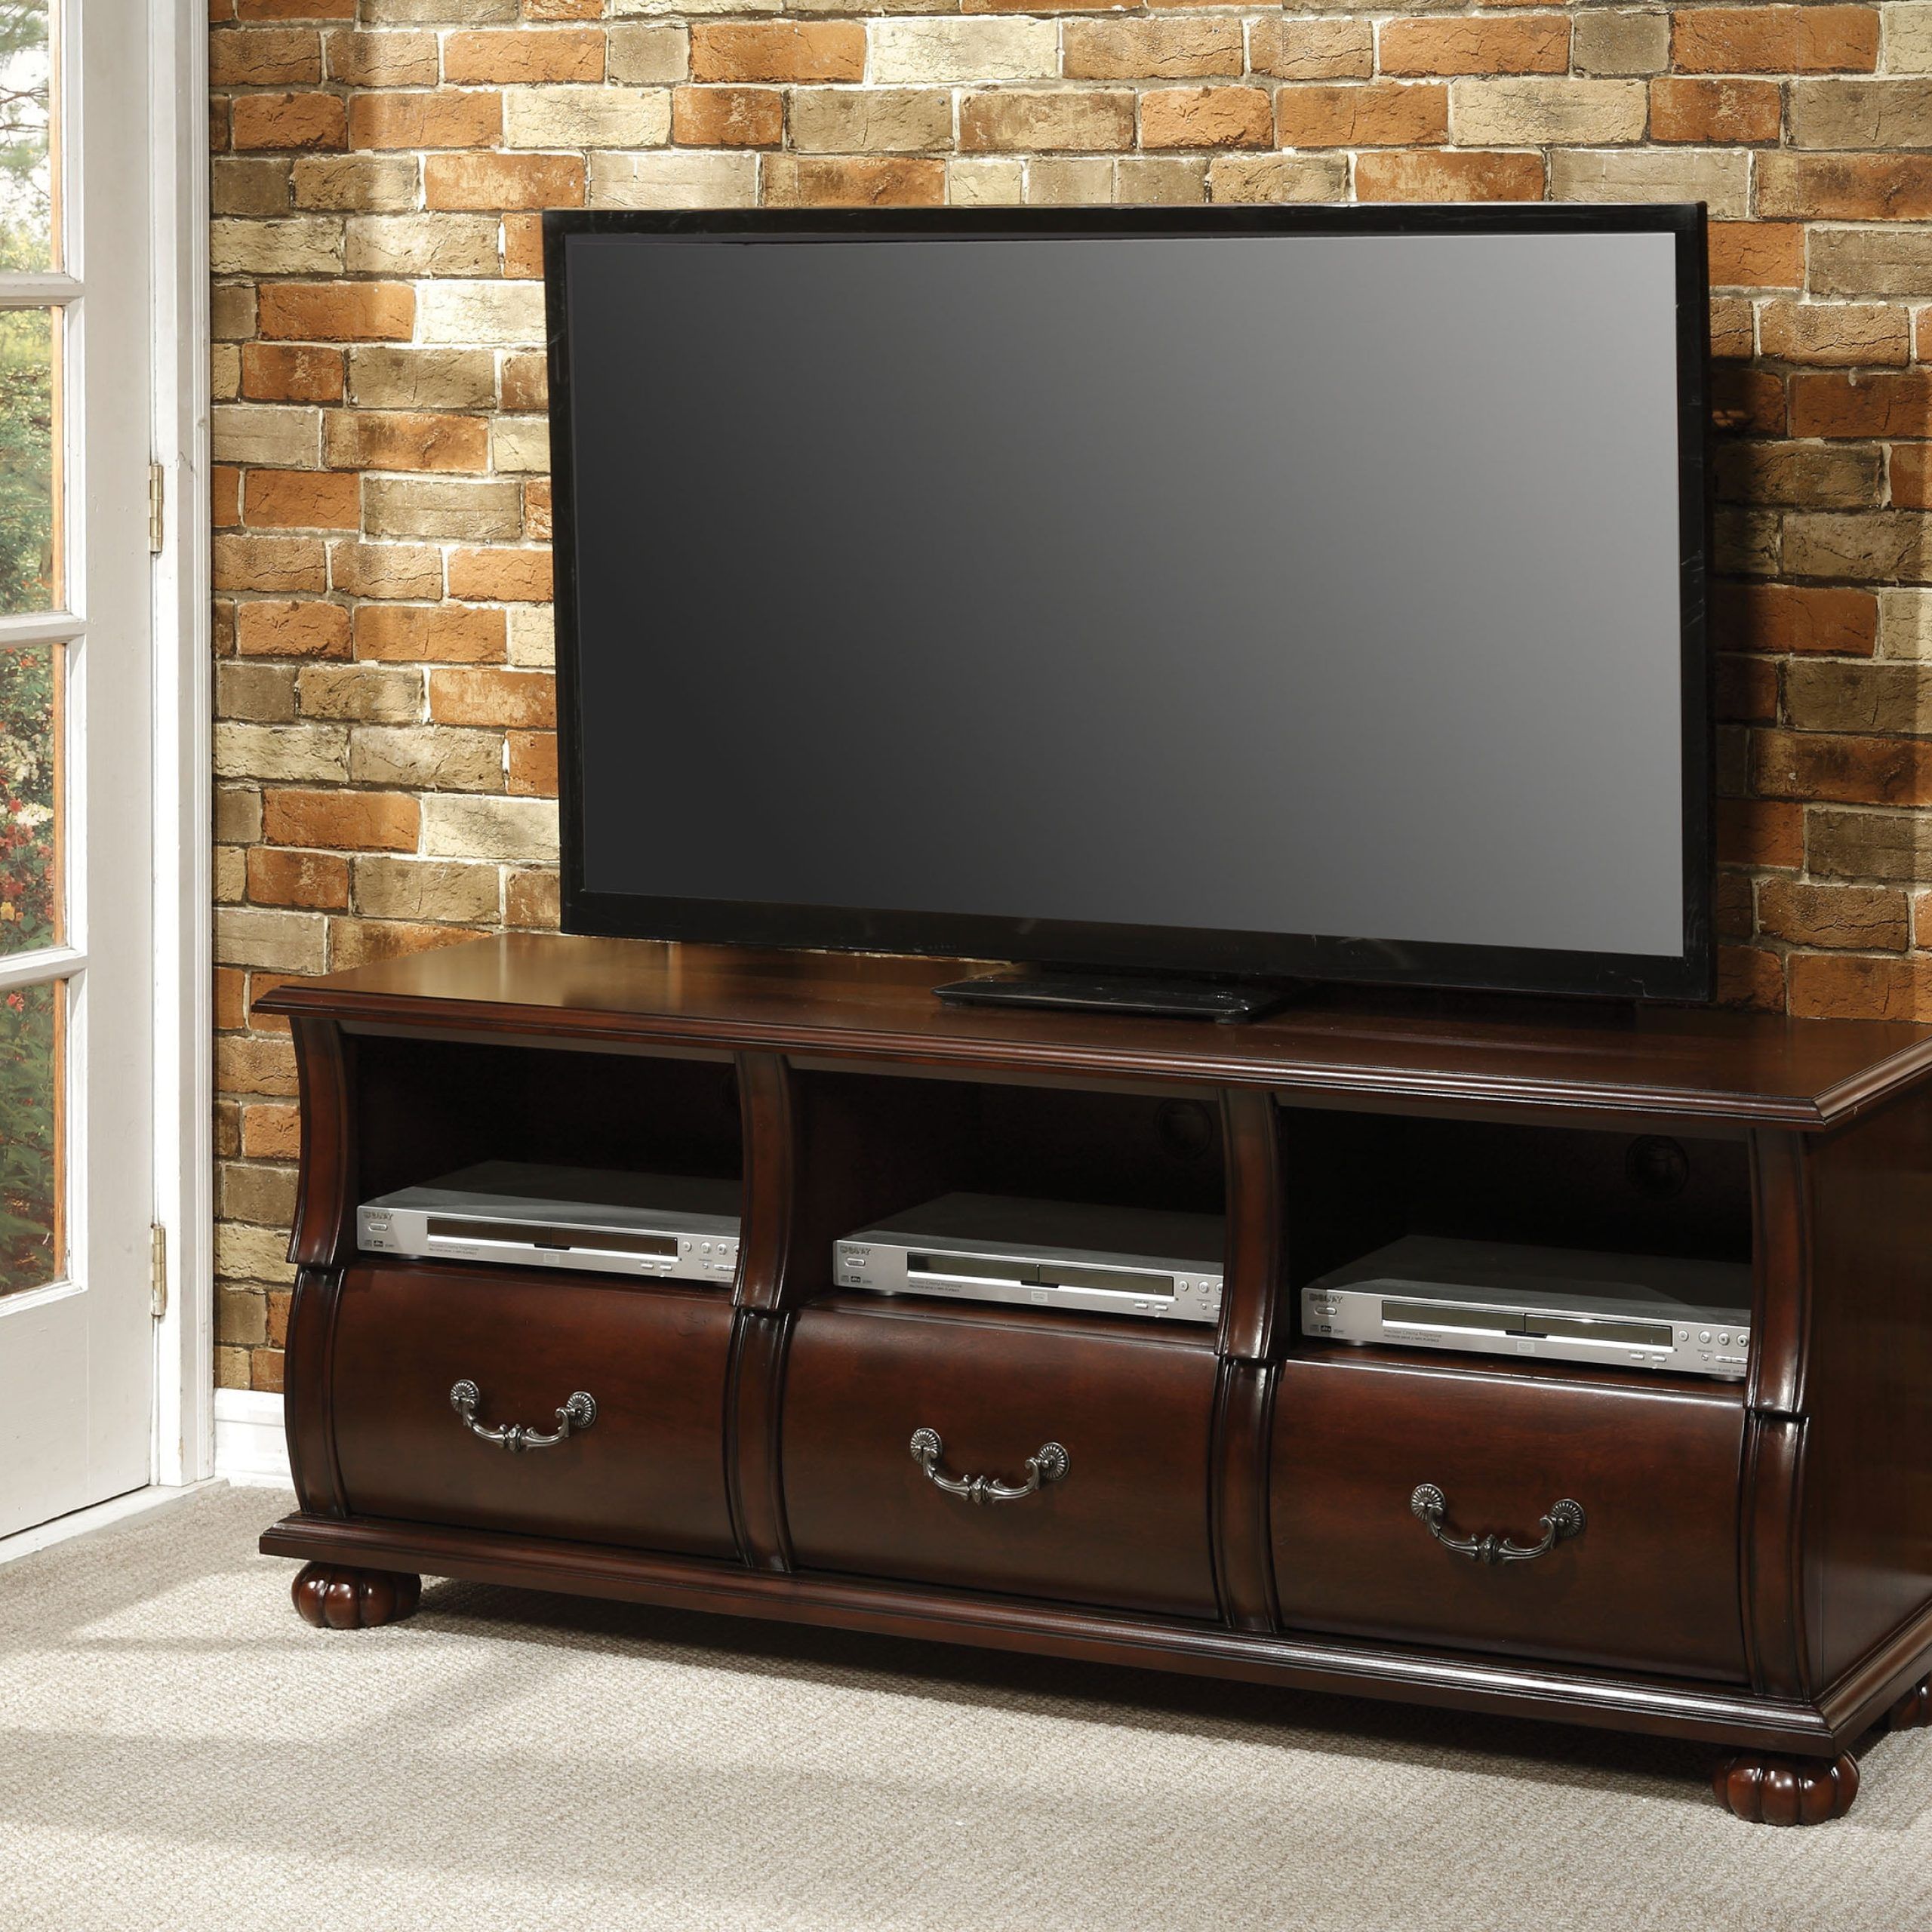 Acme Faysnow Dark Cherry Tv Stand For Flat Screen Tvs Up To 55 Within Stand For Flat Screen (View 6 of 20)